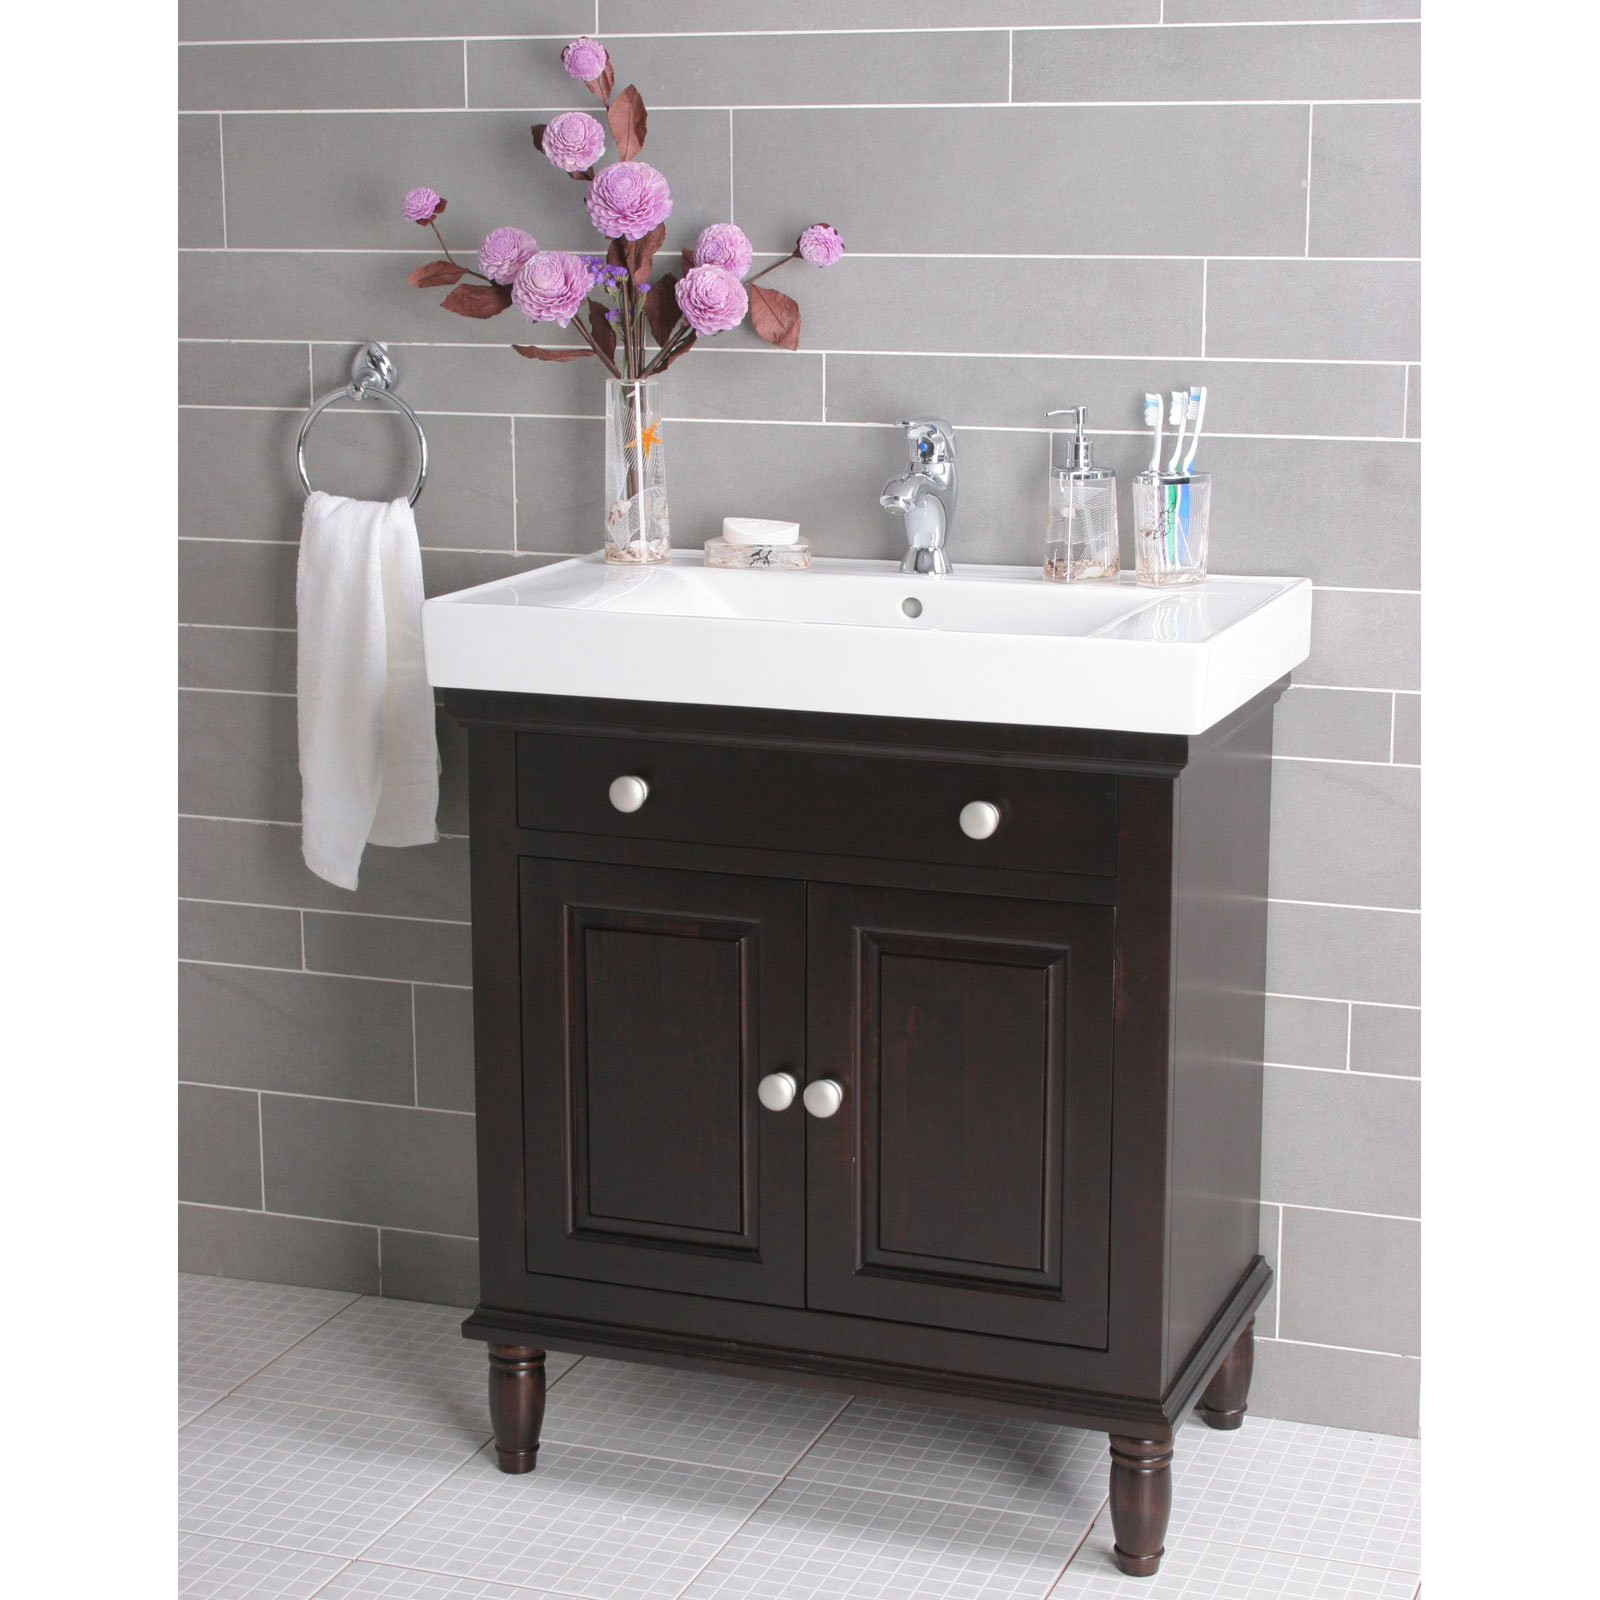 Home Depot Bathroom Vanity Clearance
 Bathroom Lowes Bathroom Vanities With Tops For Your